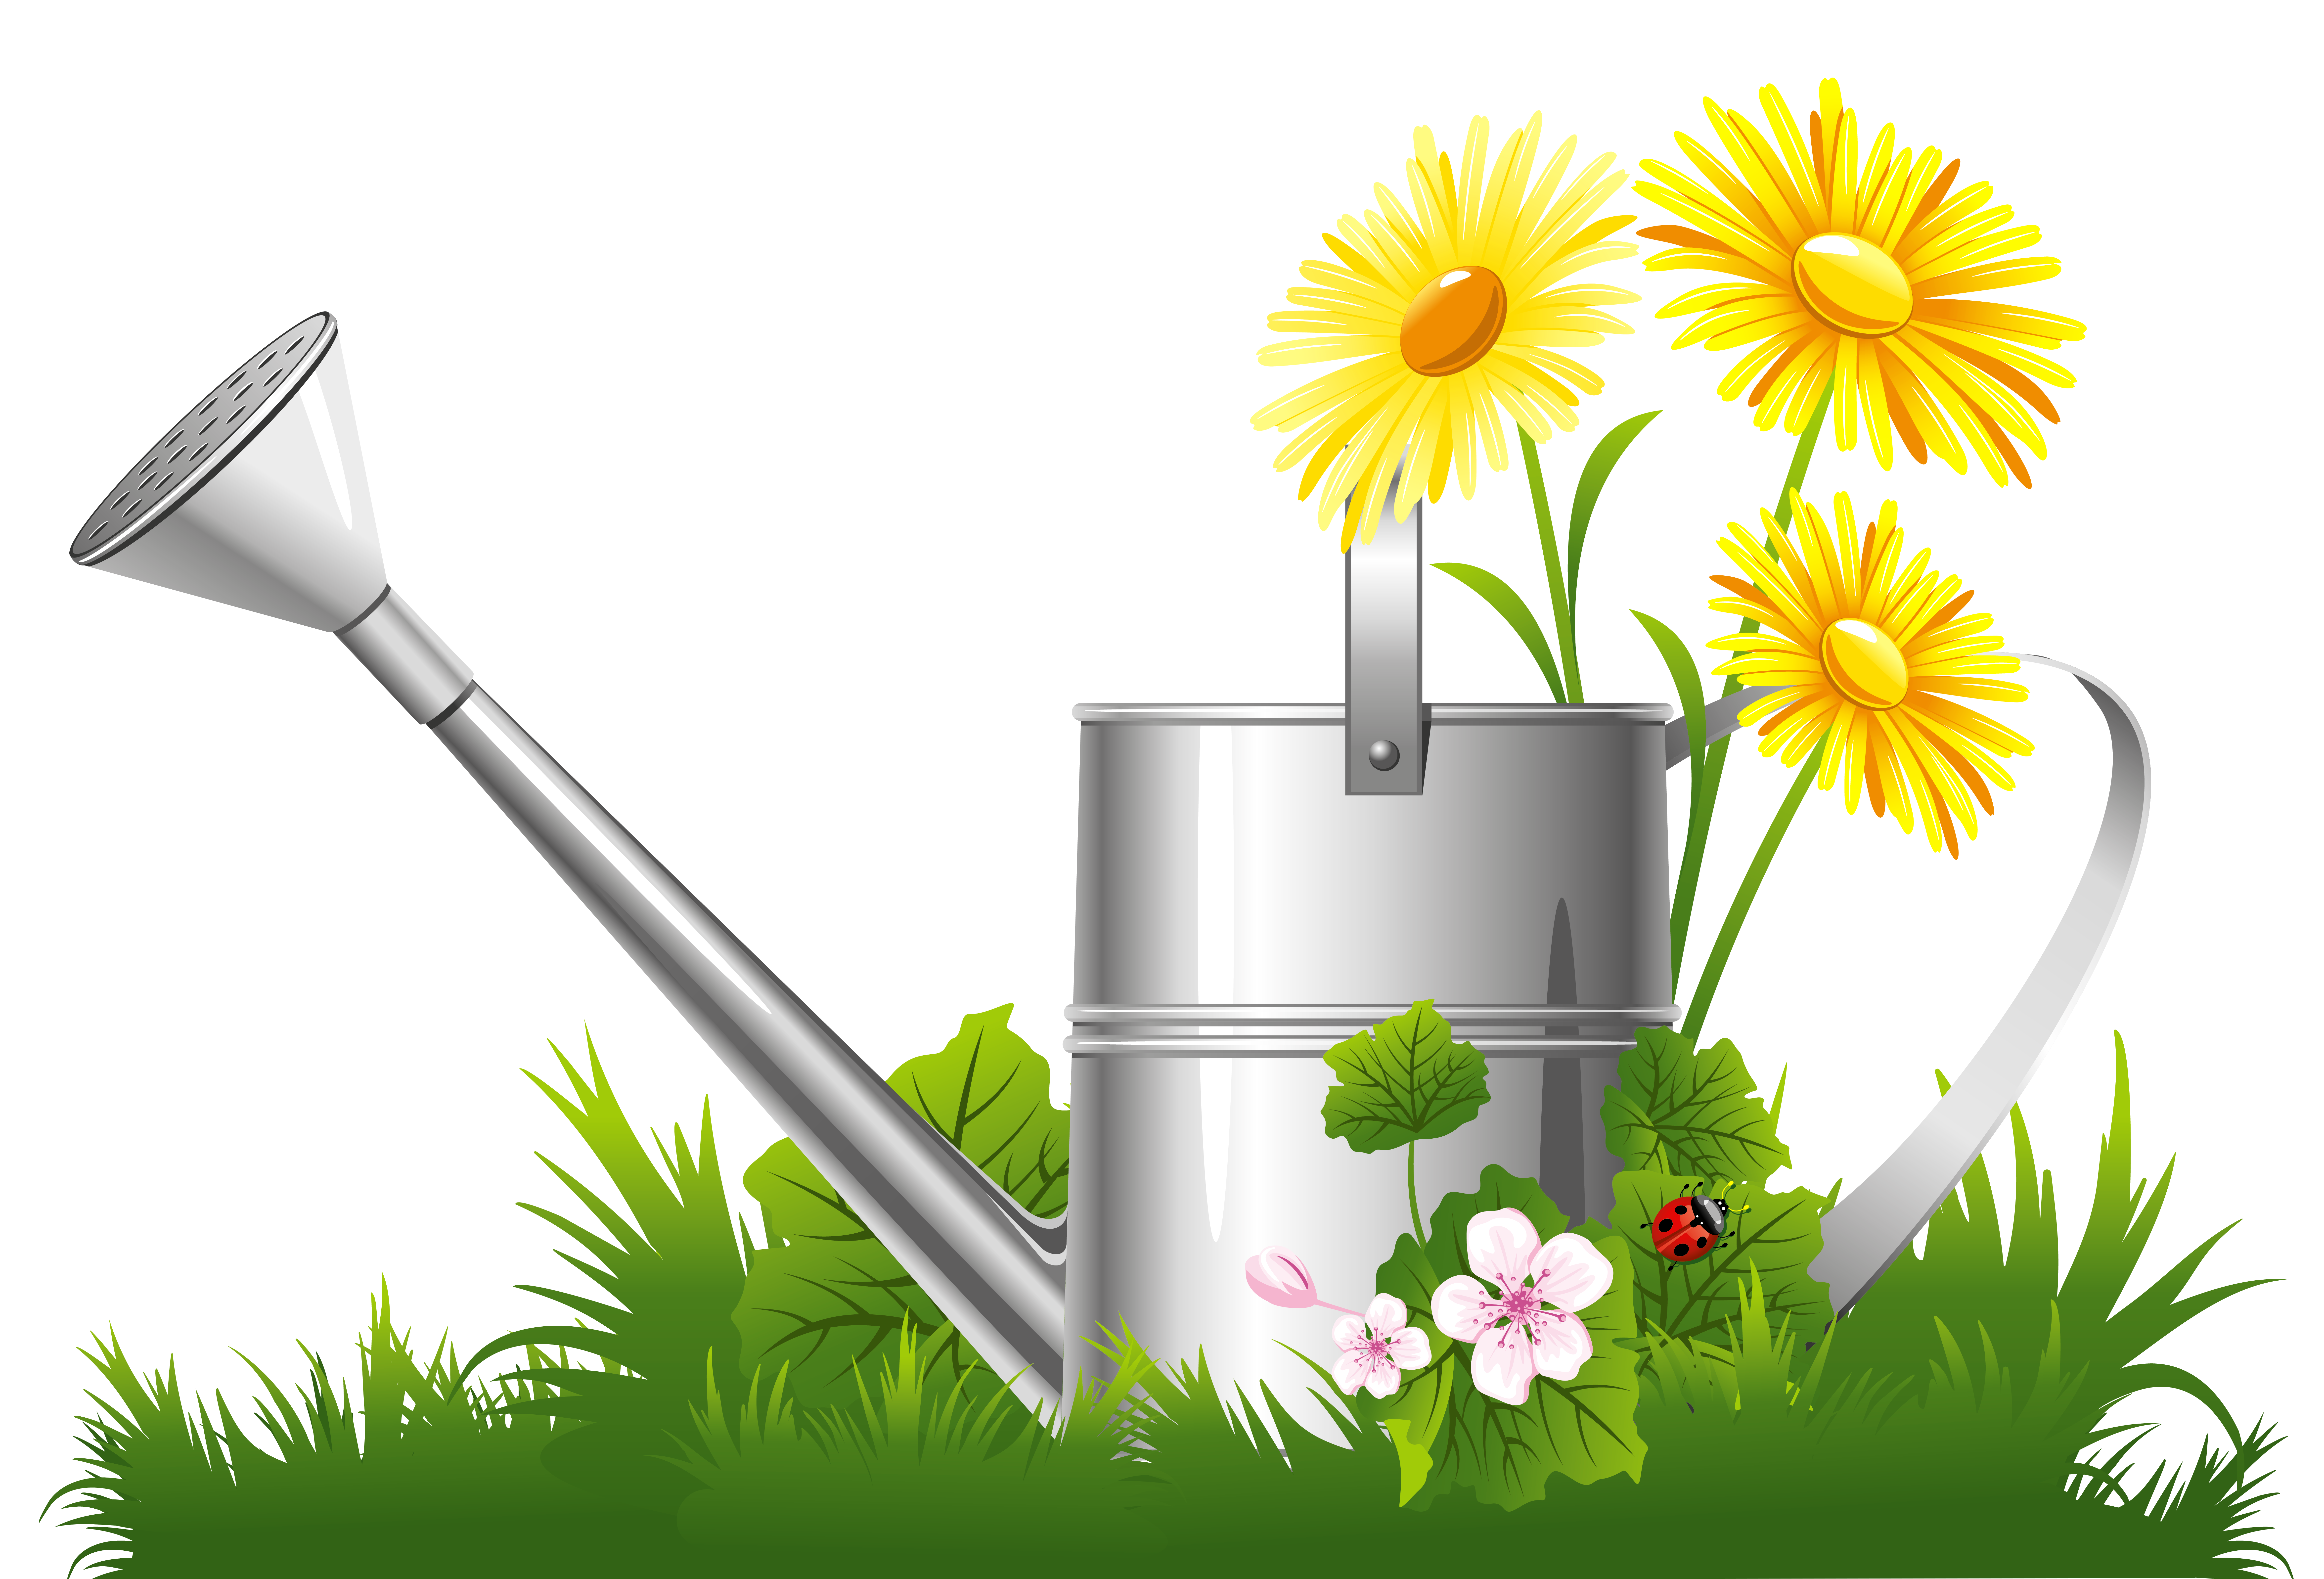 spring daisy flower with grass clipart download images #41536